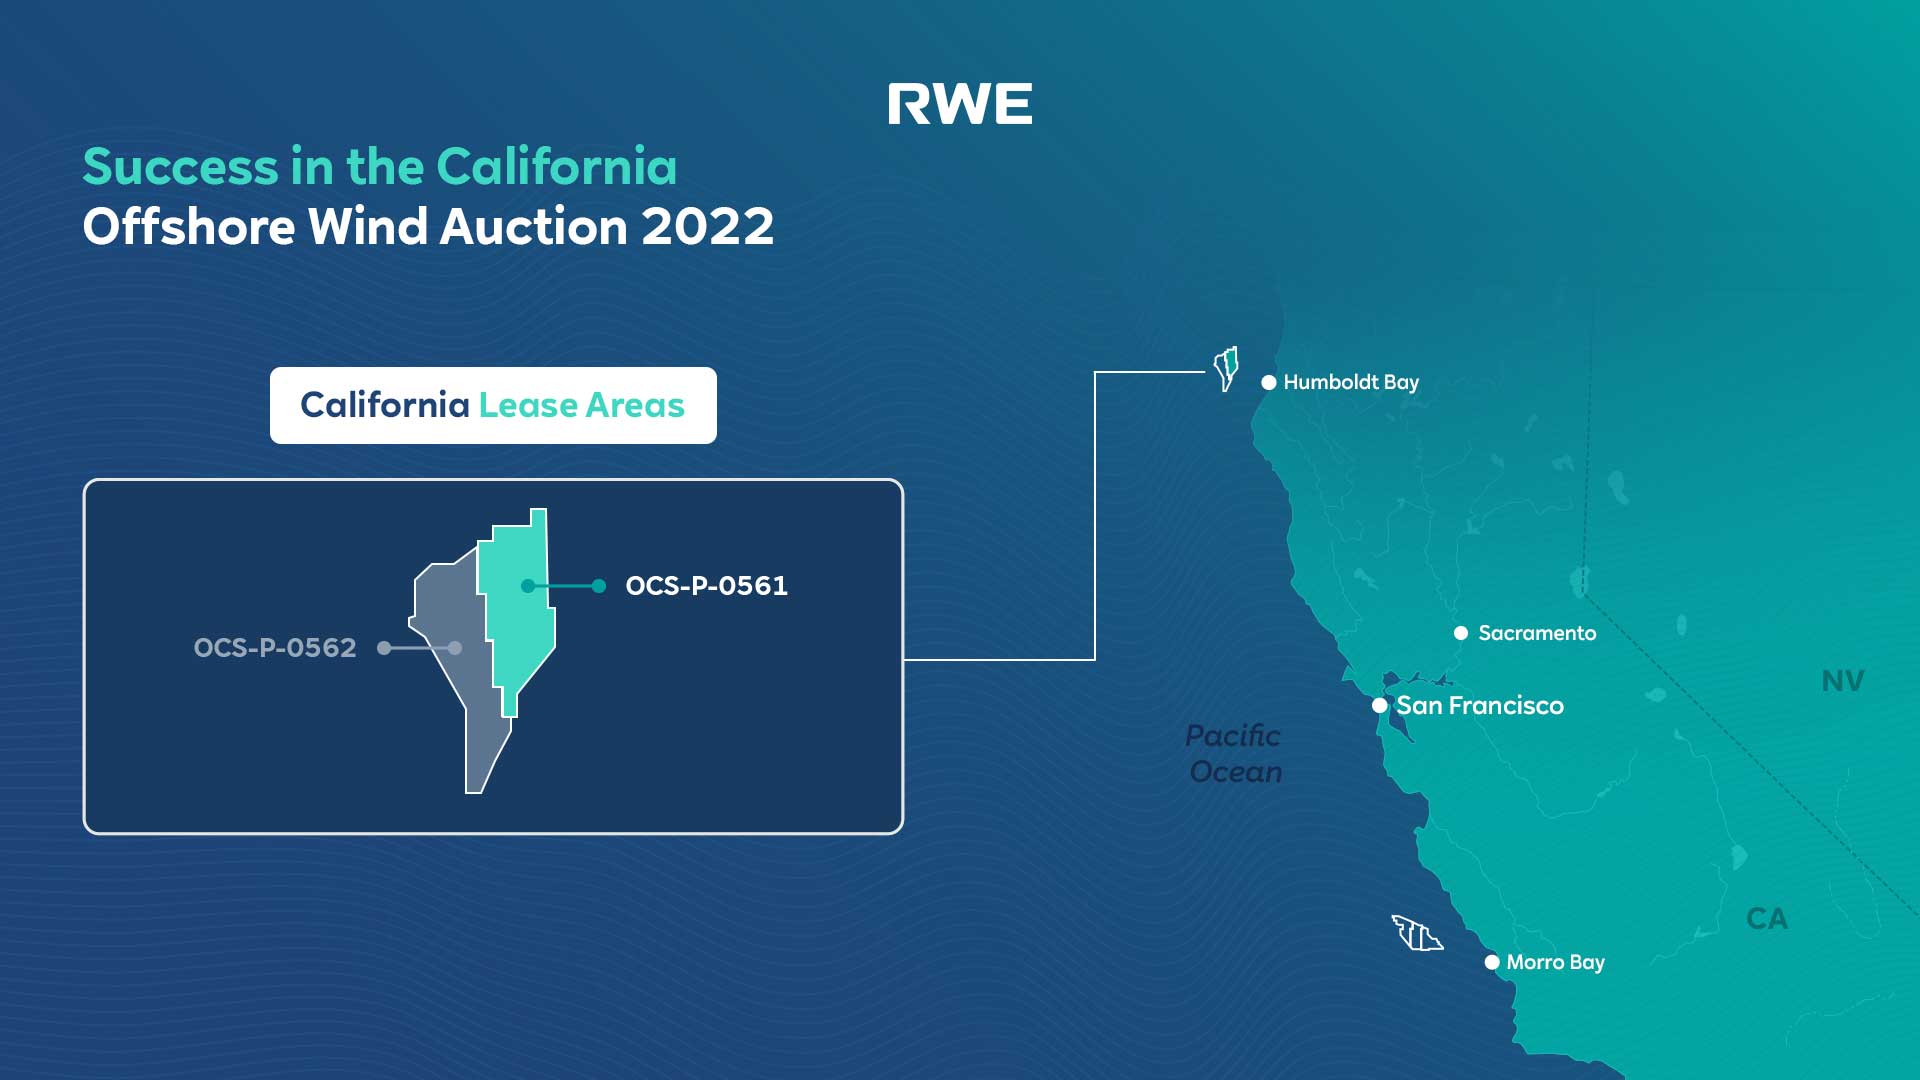 RWE strengthens U.S. offshore wind portfolio with success in California’s floating offshore wind auction 